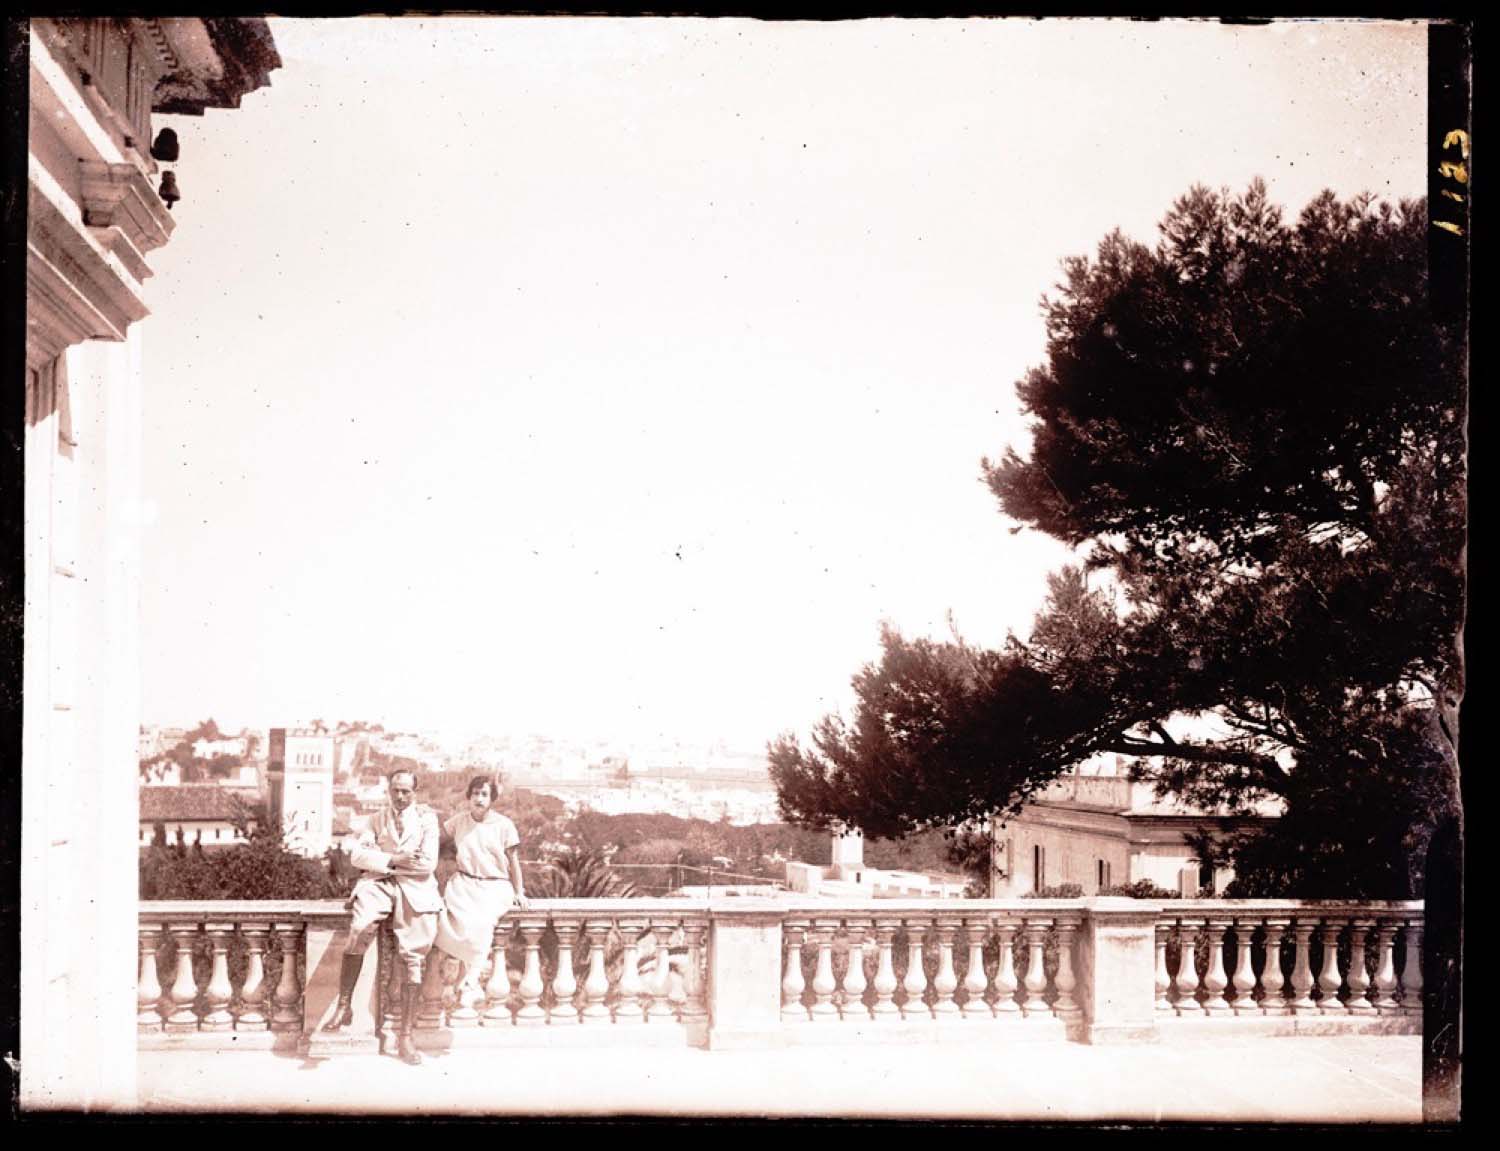 General view of the city from the terrace of Villa de France, the Church of St. Andrew visible in the background